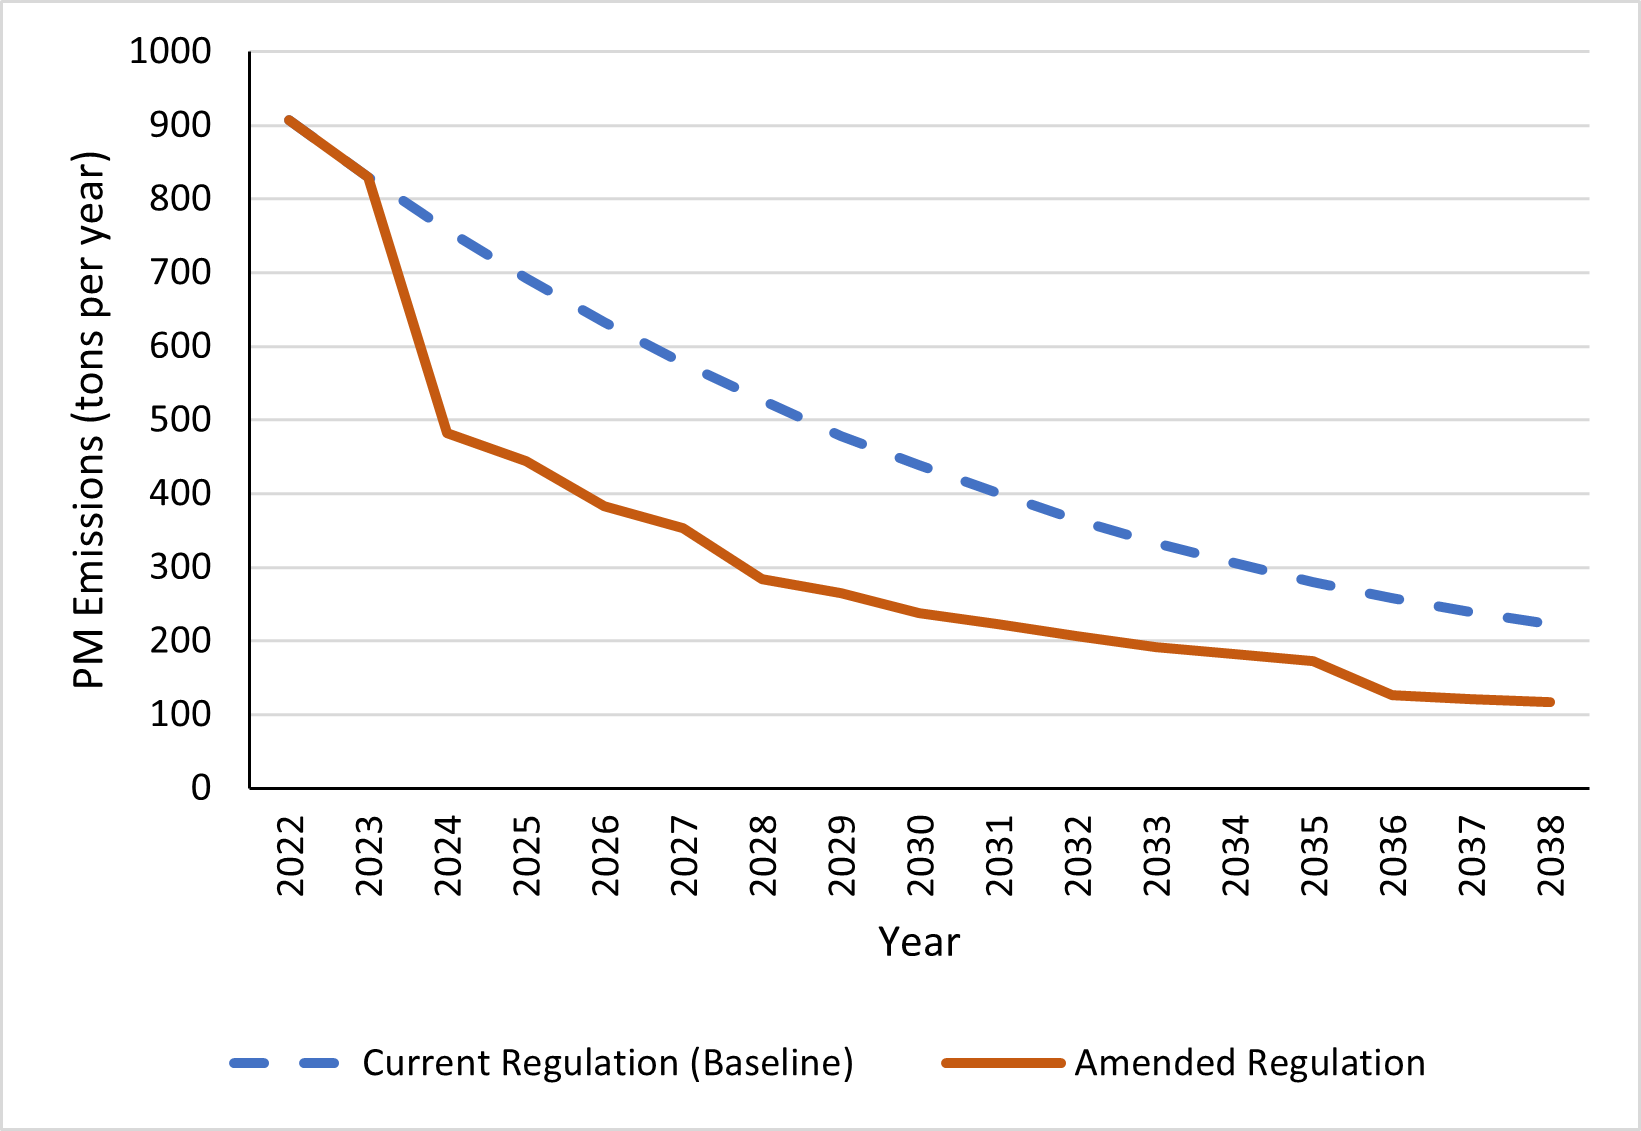 This graph shows the projected PM emissions from off-road diesel vehicles under the Baseline scenario, represented by the dashed blue curve, and the Amendments, represented by the solid orange curve, from 2022 through 2038. The two curves begin together, with about 830 tons of PM per year, but diverge starting in 2024. The baseline scenario shows a continued PM emission decrease that slightly slows around 2030. The Amendments show a quick drop in emissions in the first year, and continues to decrease, keeping a reduction of about 240 tons of PM per year compared to the baseline scenario, before beginning to slow in 2028, with the gap in emissions between the two scenarios slowly reduced. By 2038, the PM emissions under the baseline scenario is projected to be 220 tons per year, compared to the NOx emissions of 120 tons under the Amendments.